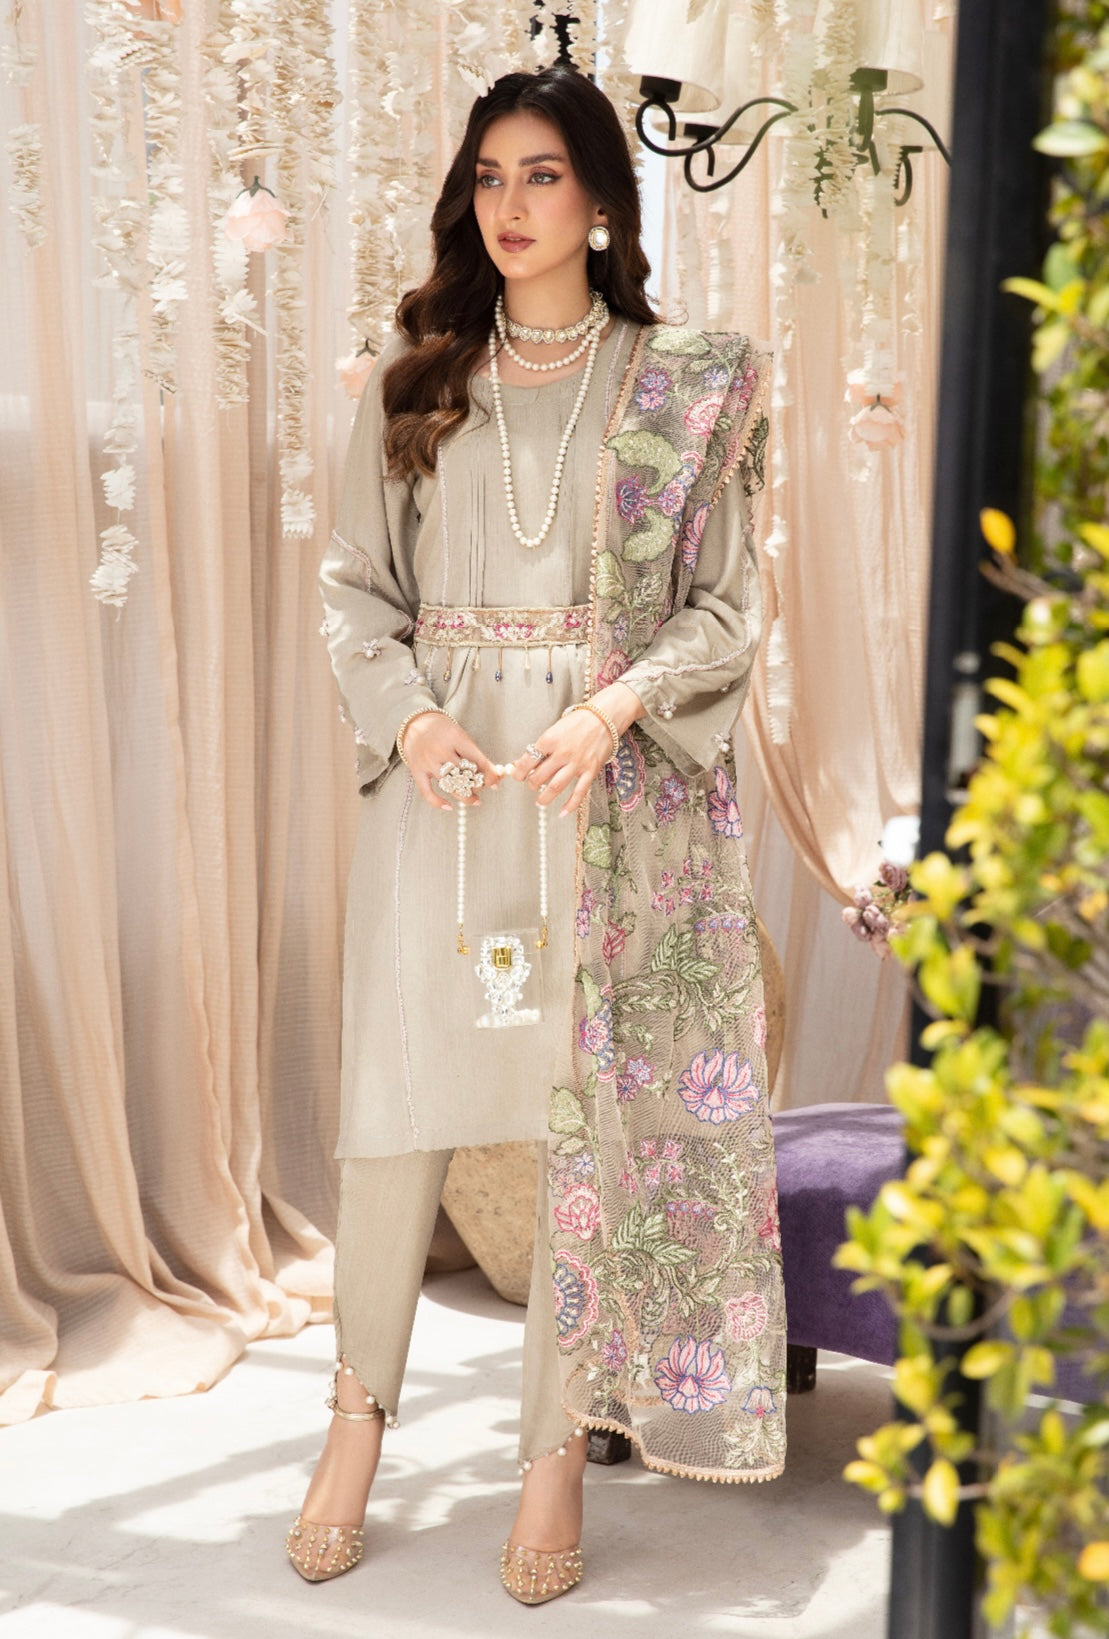 SIMRANS Ivana beaded embroidered lawn suit in light beige Mother Daughter/kids